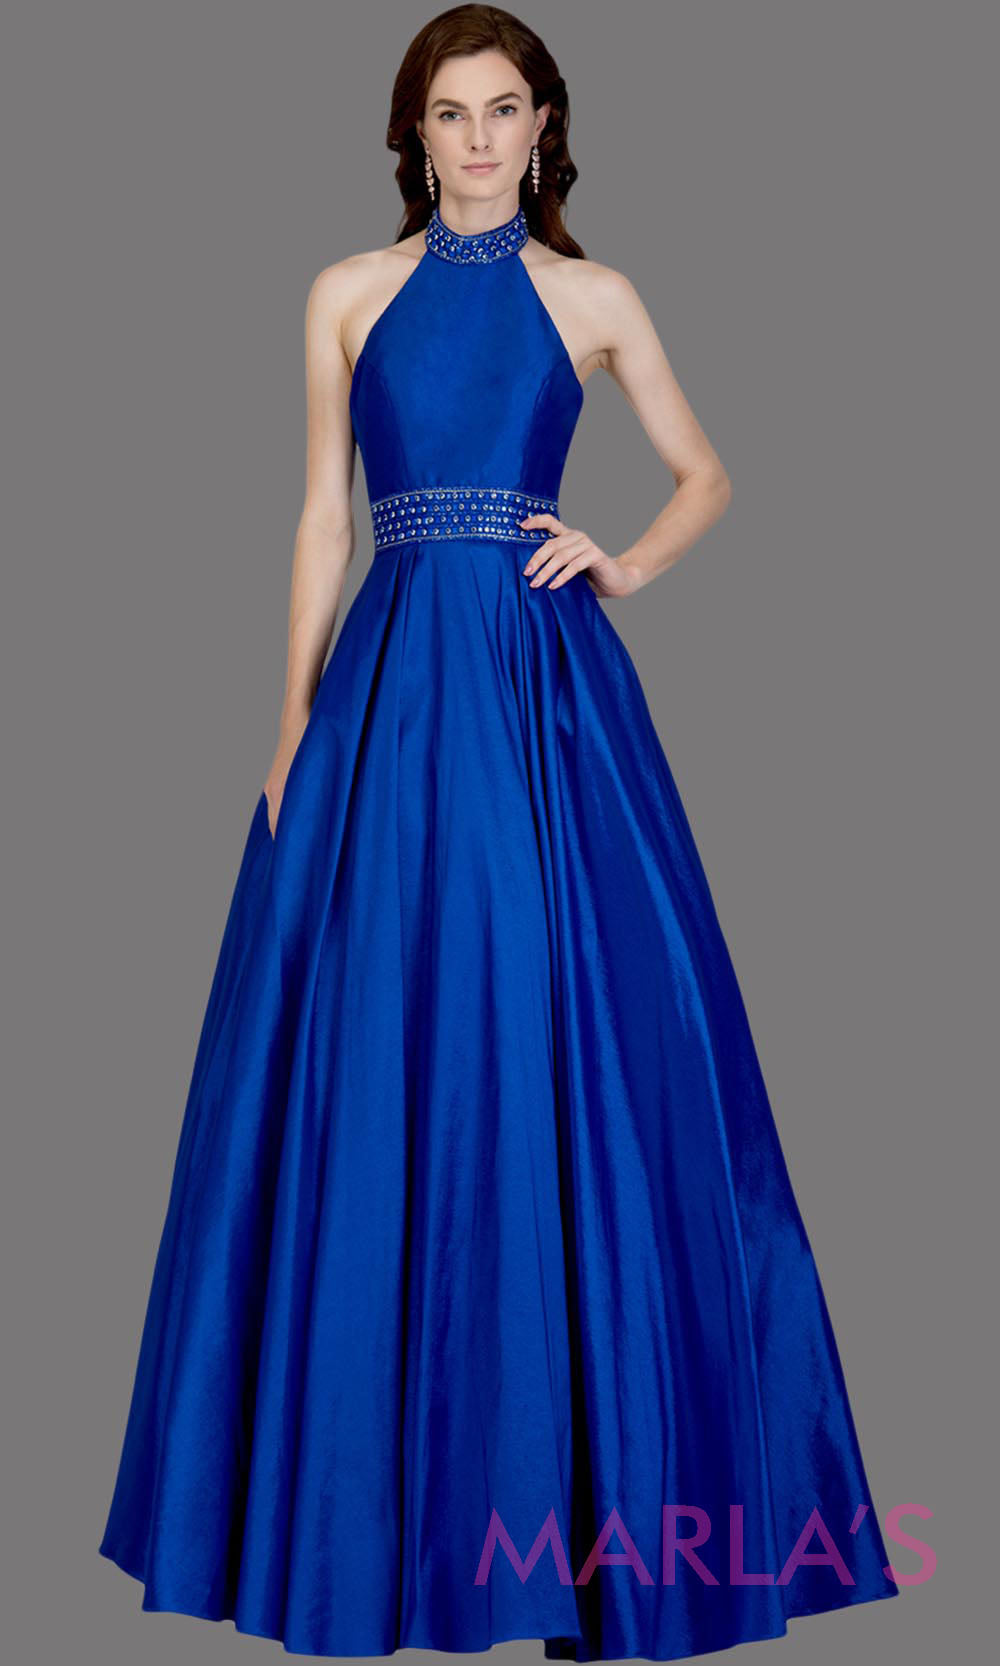 Long royal blue high neck halter semi ball gown with low back. This blue formal a line gown is perfect as a blue prom dress, wedding reception or engagement dress, indowestern formal party gown, wedding guest dress. Plus Sizes avail